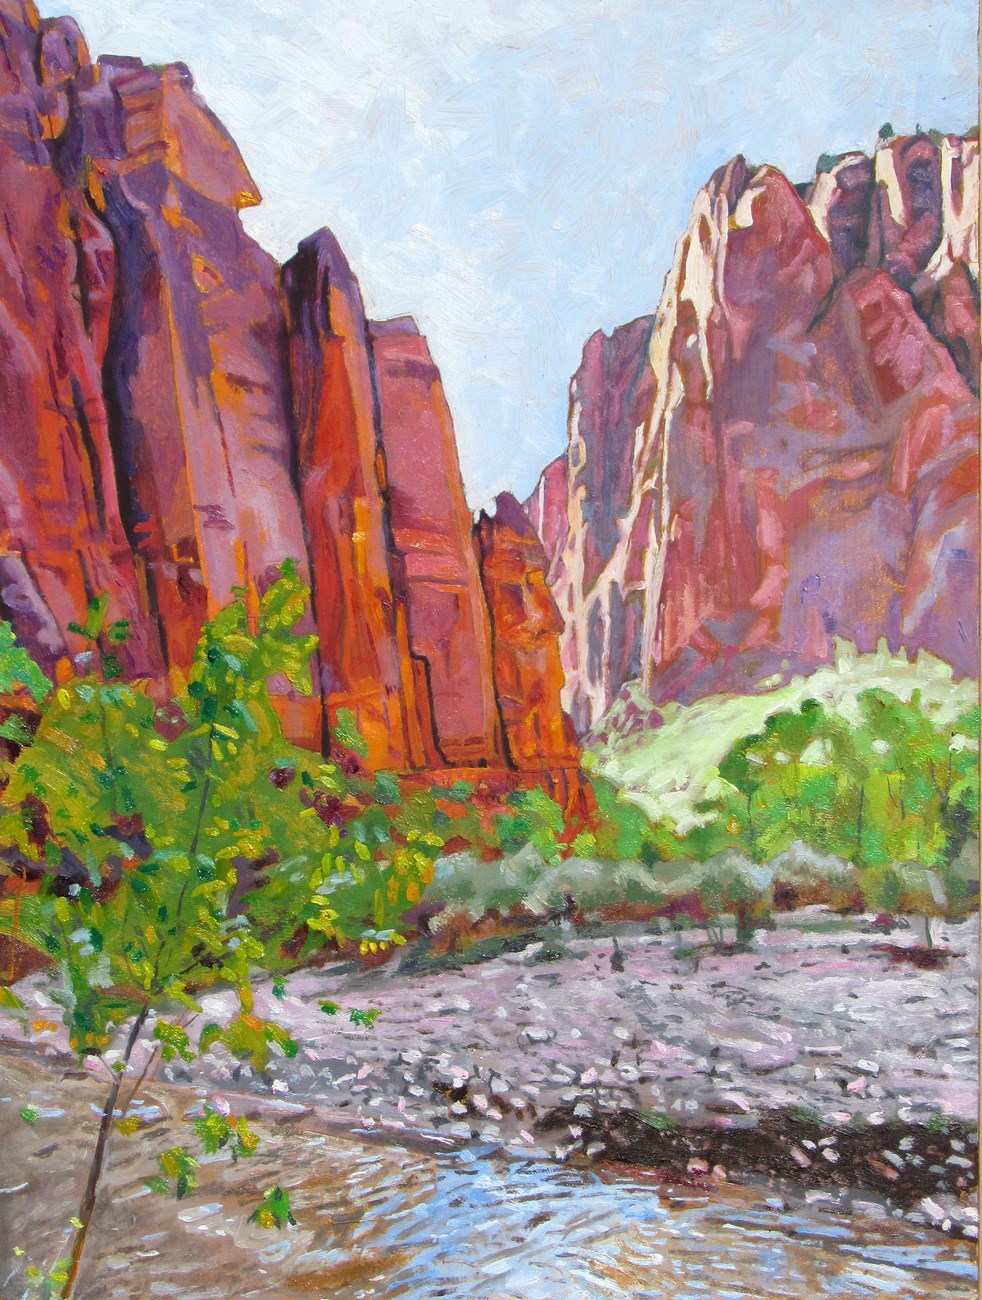 Vibrant oil paint illustrating the Virgin River and red rocks of the canon wall with bright green trees along the edge of the riverbank.